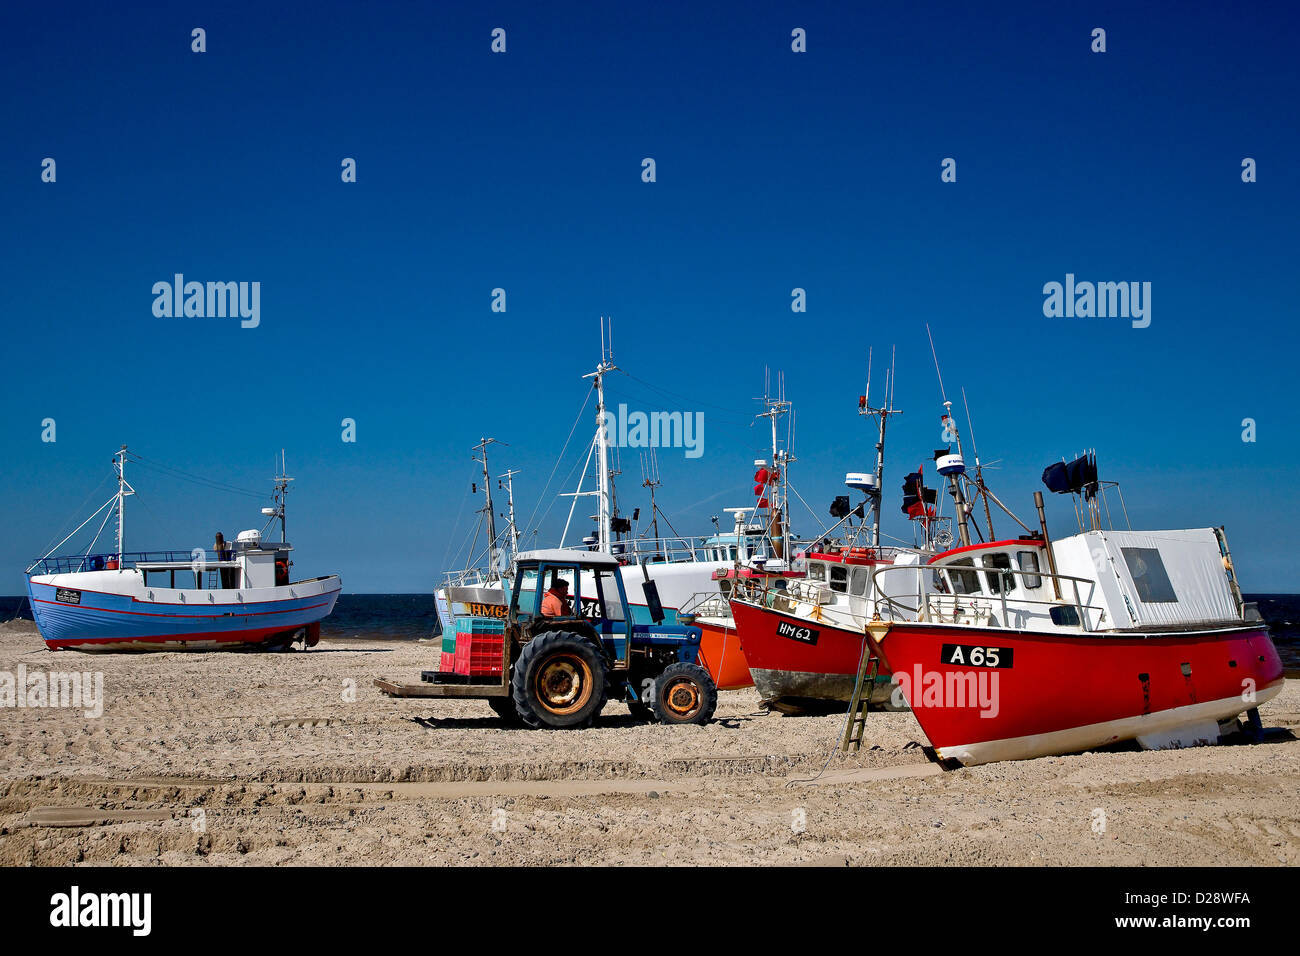 Fishing cutters standing on the bea Stock Photo